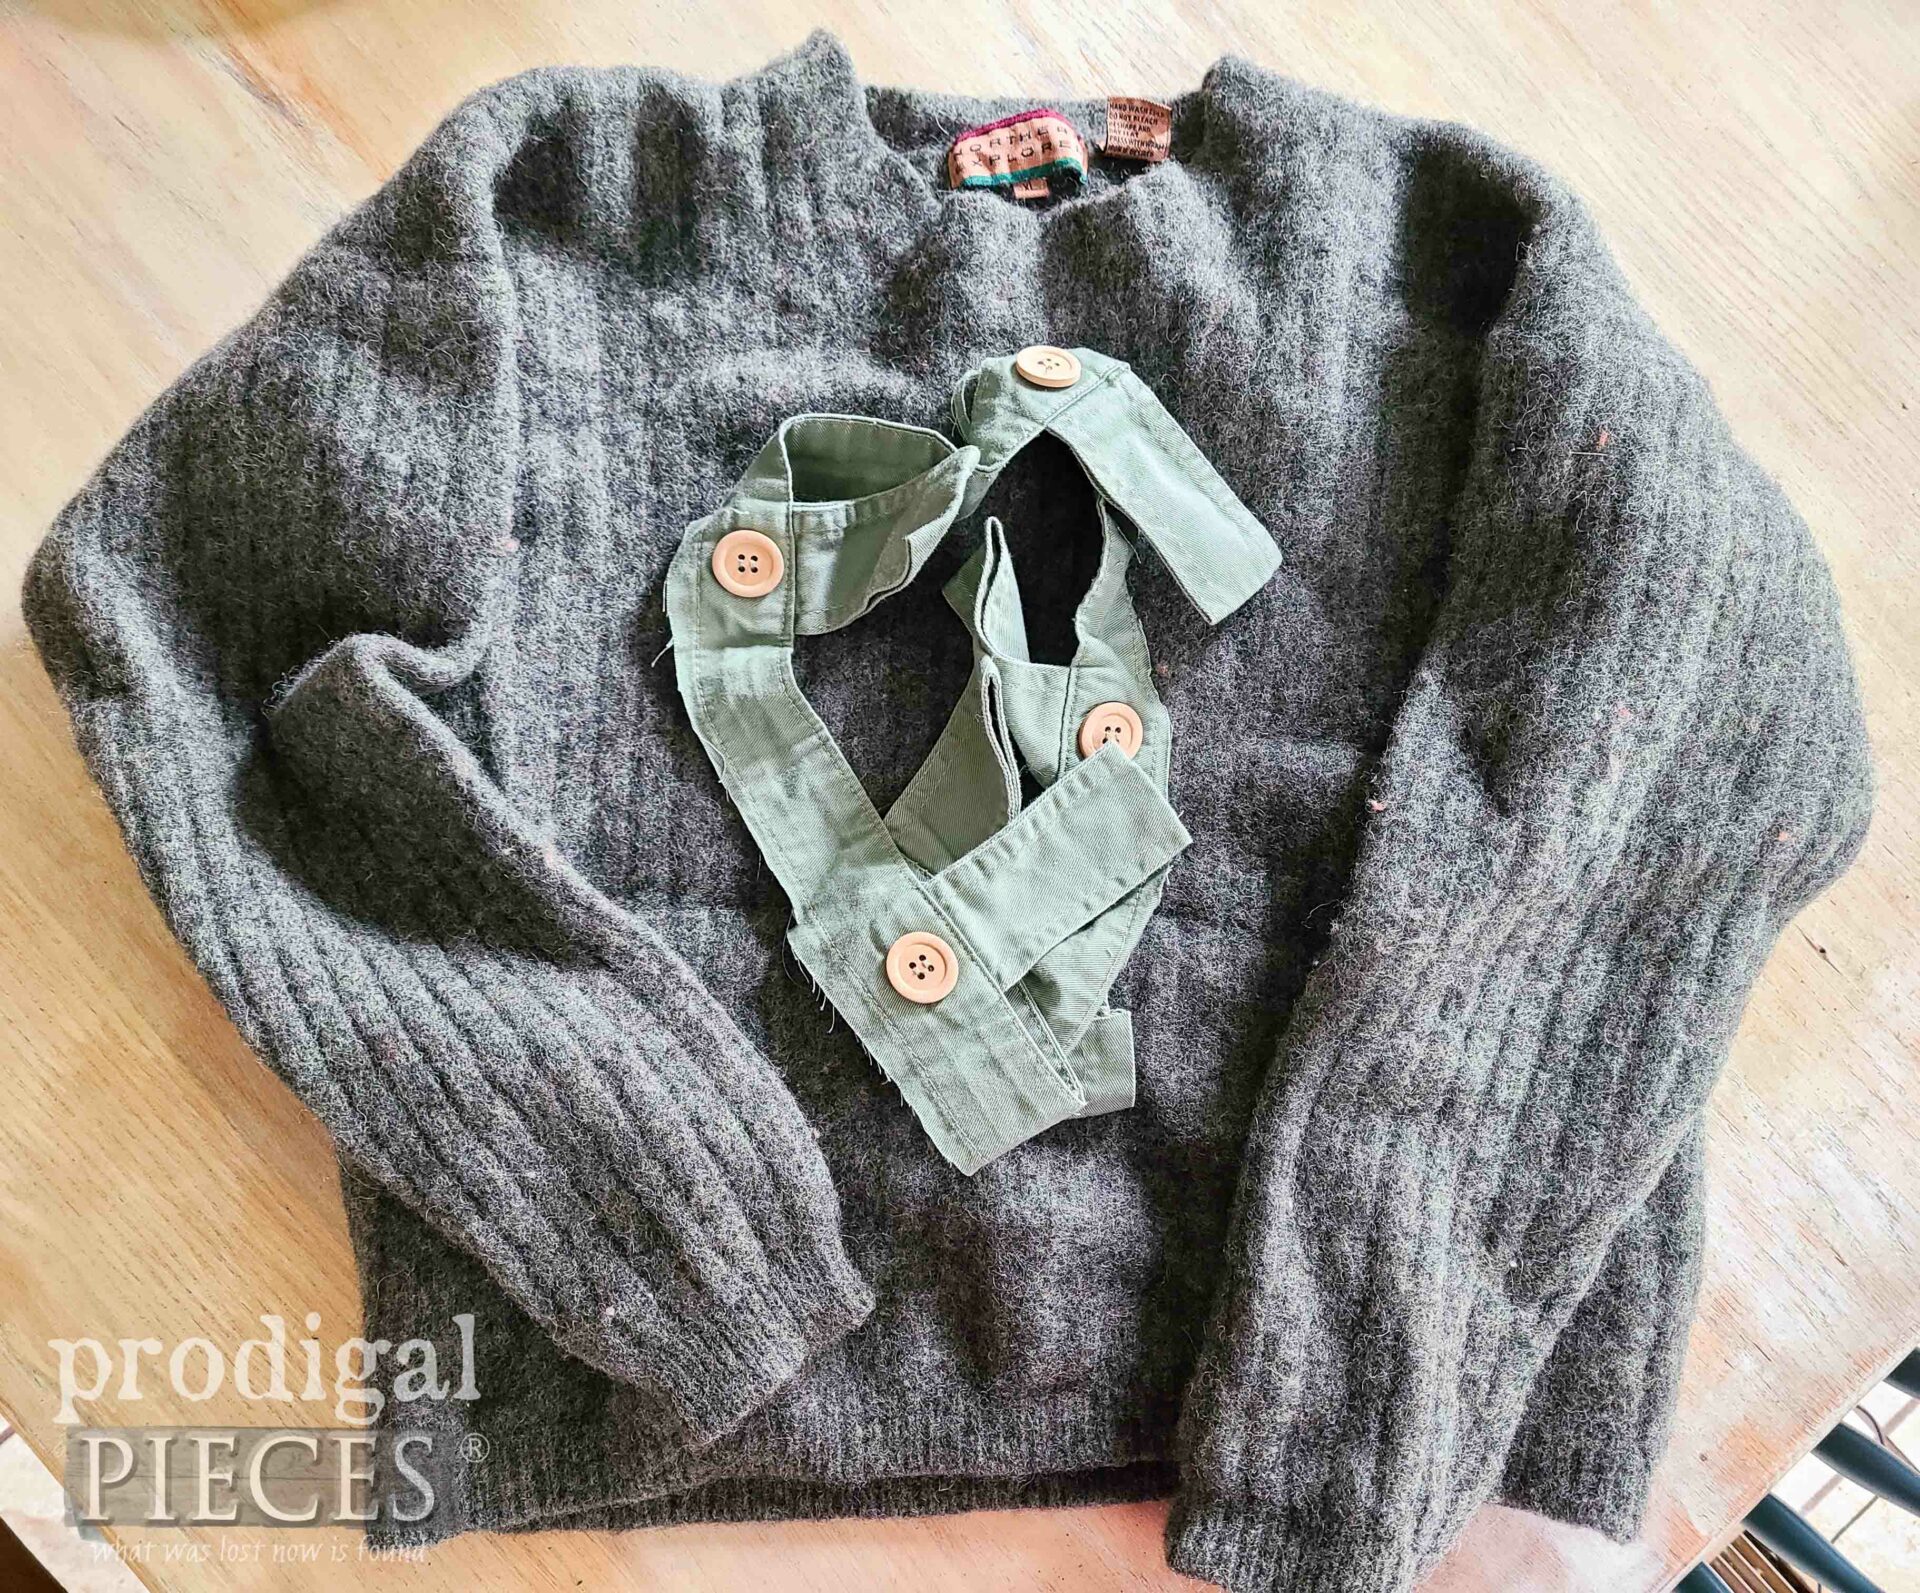 Thrifted Wool Sweater Before Refashion by Larissa of Prodigal Pieces | prodigalpieces.com #prodigalpieces